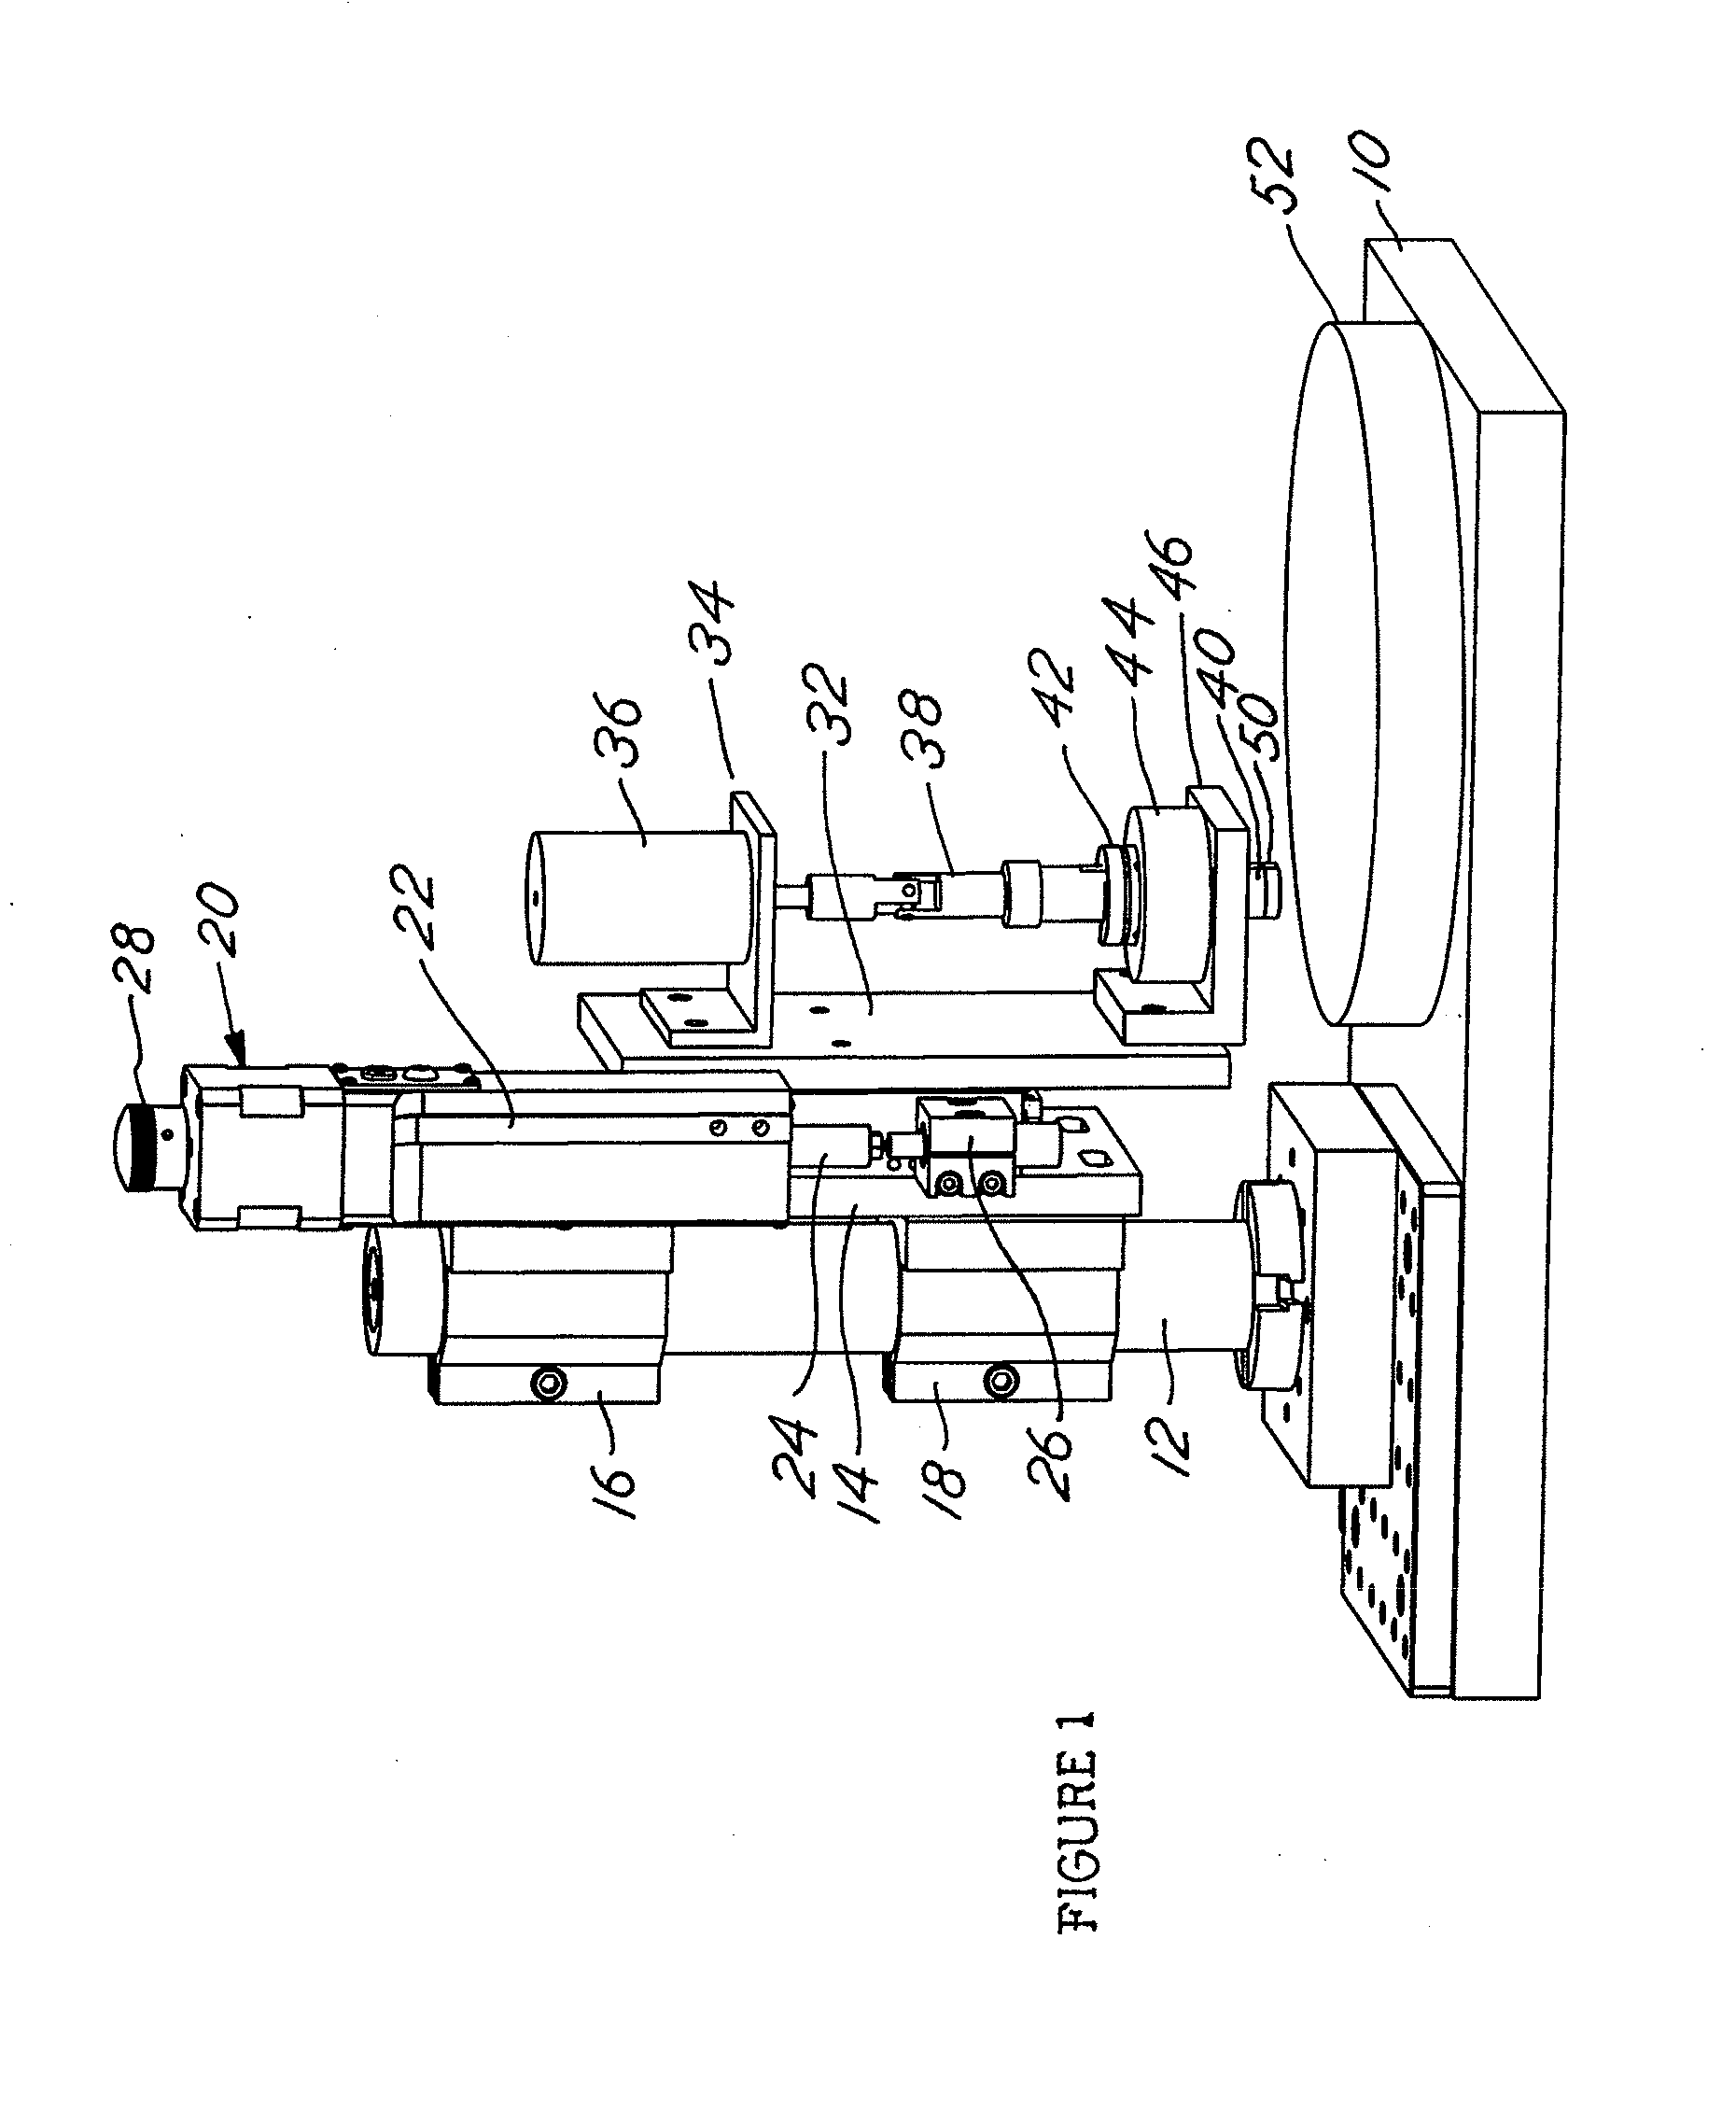 Apparatus and methods for testing the polishability of materials